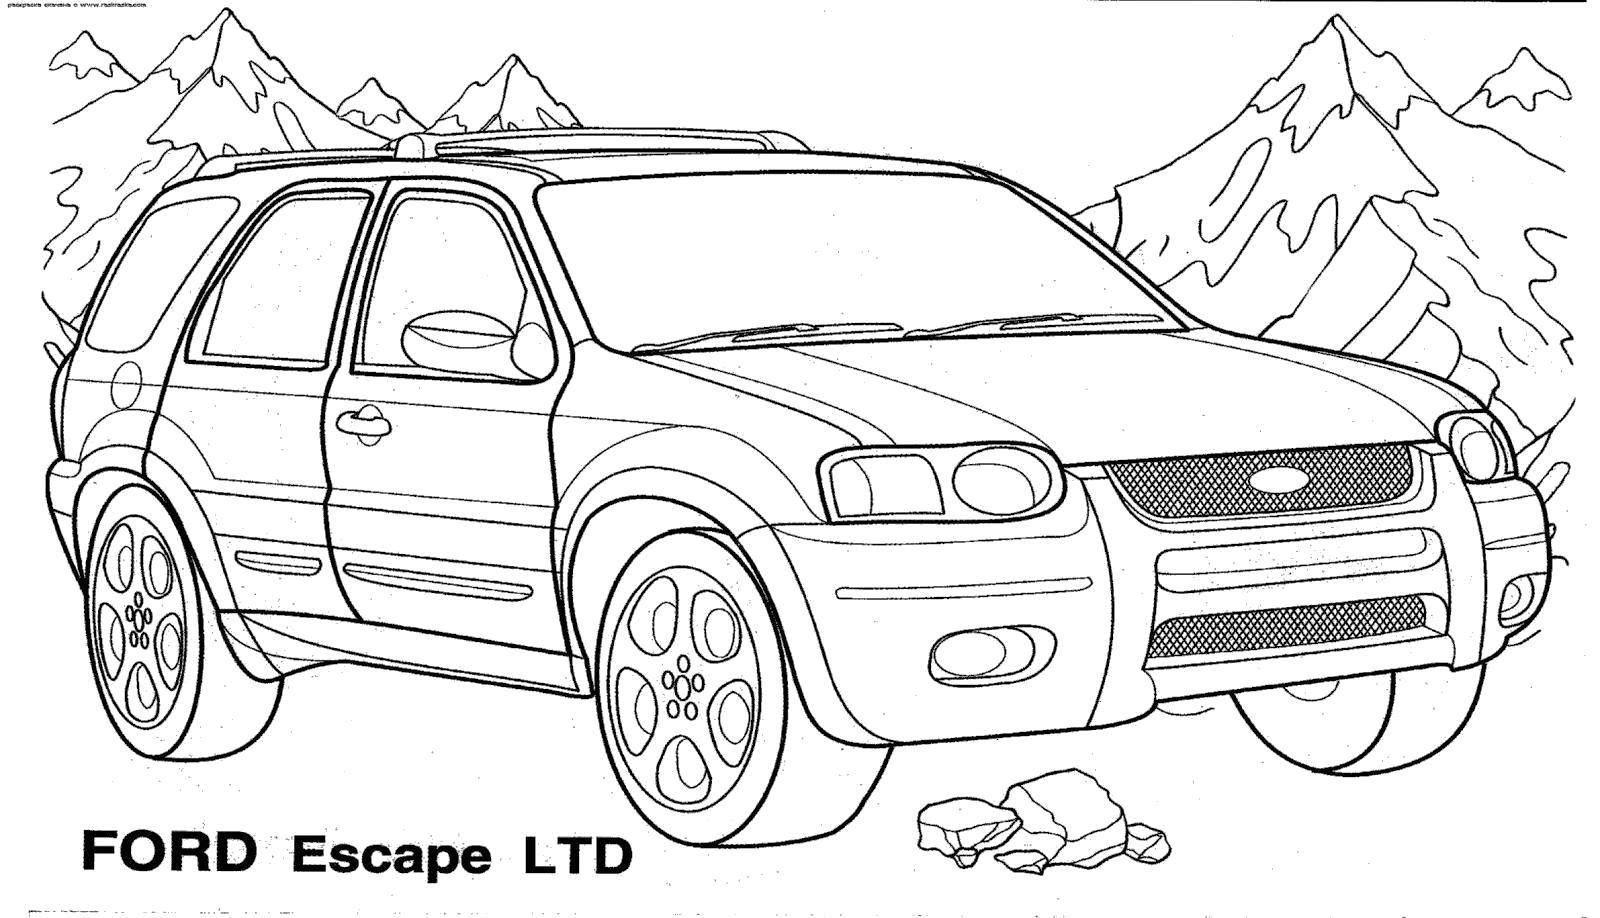 Coloring Ford escape. Category transportation. Tags:  Transport, car.